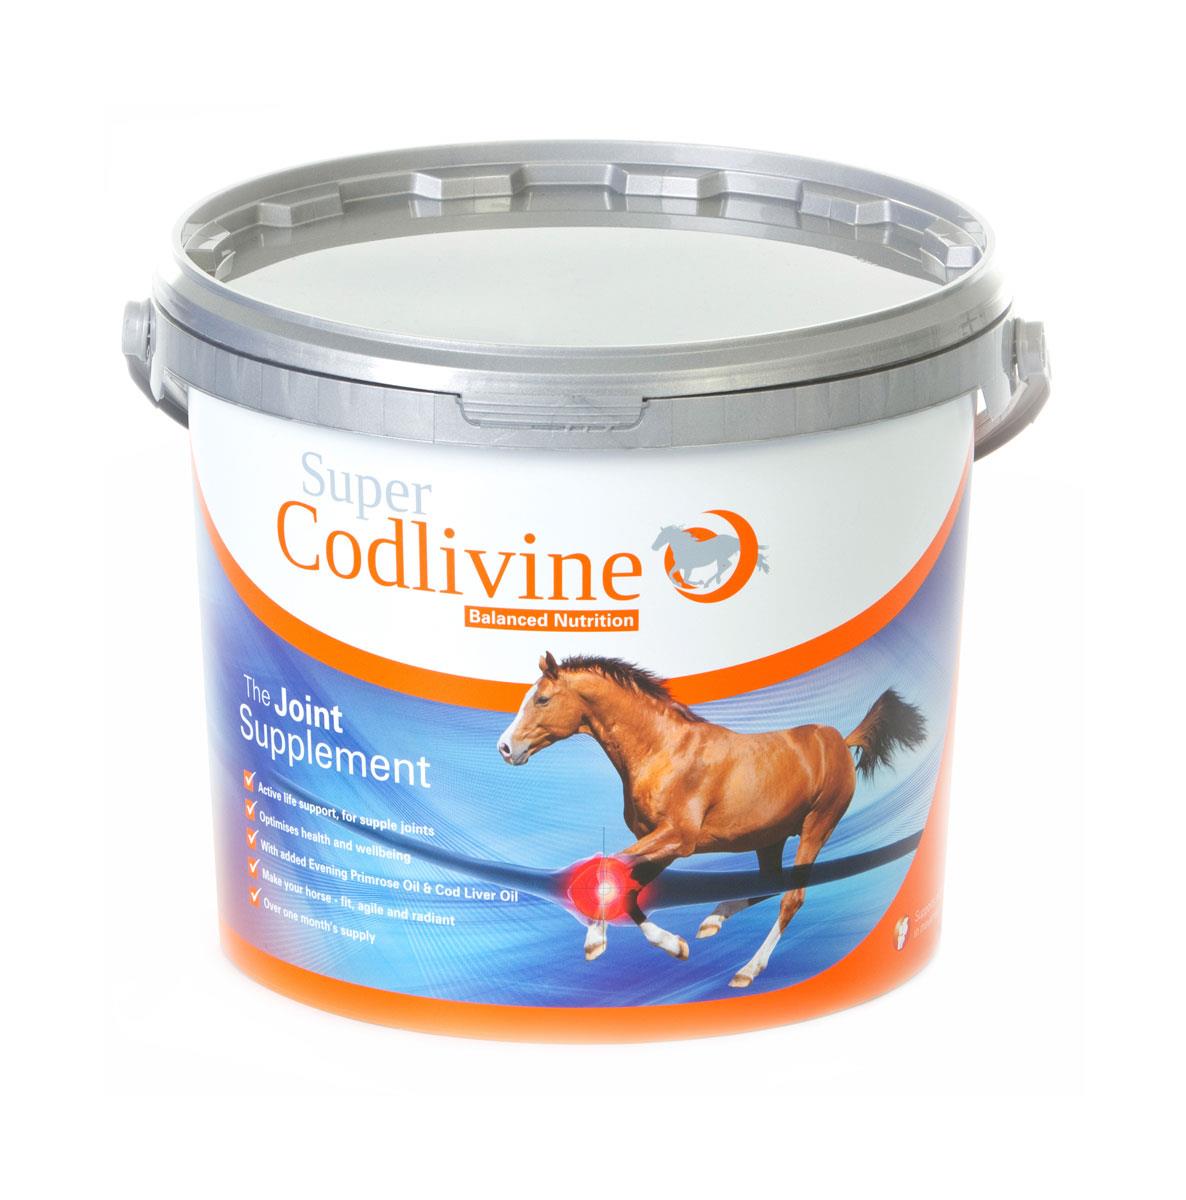 Super Codlivine The Joint Supplement - Just Horse Riders